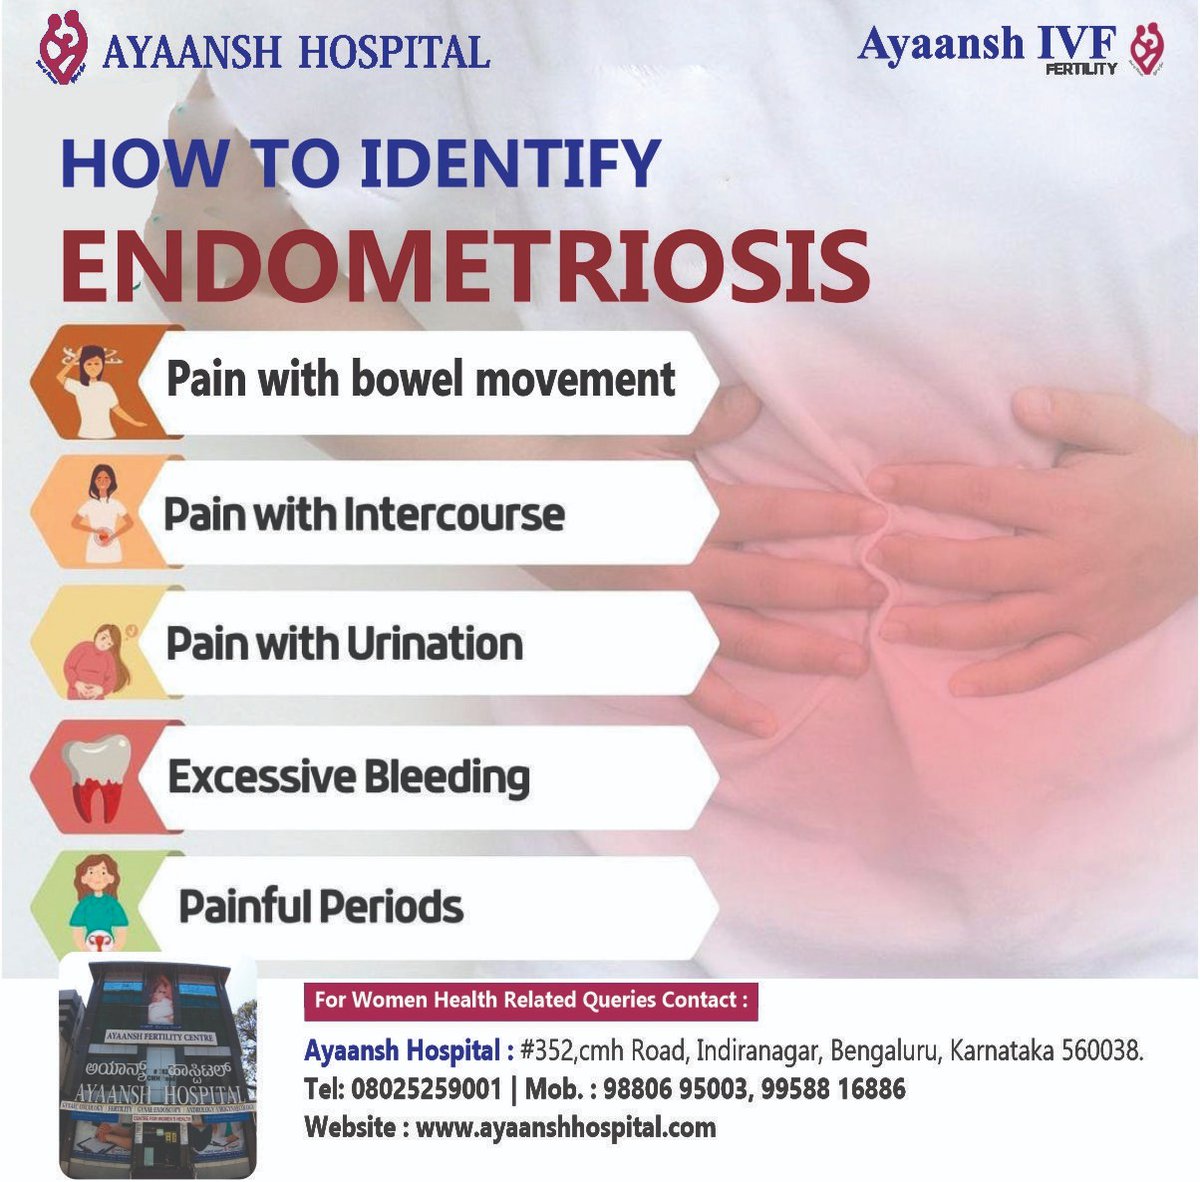 HOW TO IDENTIFY ENDOMETRIOSIS

✅ Pain with bowel movement
✅ Pain with intercourse
✅ Pain with urination
✅ Excessive bleeding
✅ Painful periods

#endometriosis #painfulperiod #painwithurination #bleeding #infertility #fertility #fertilityexperts #treatment #gynaecology